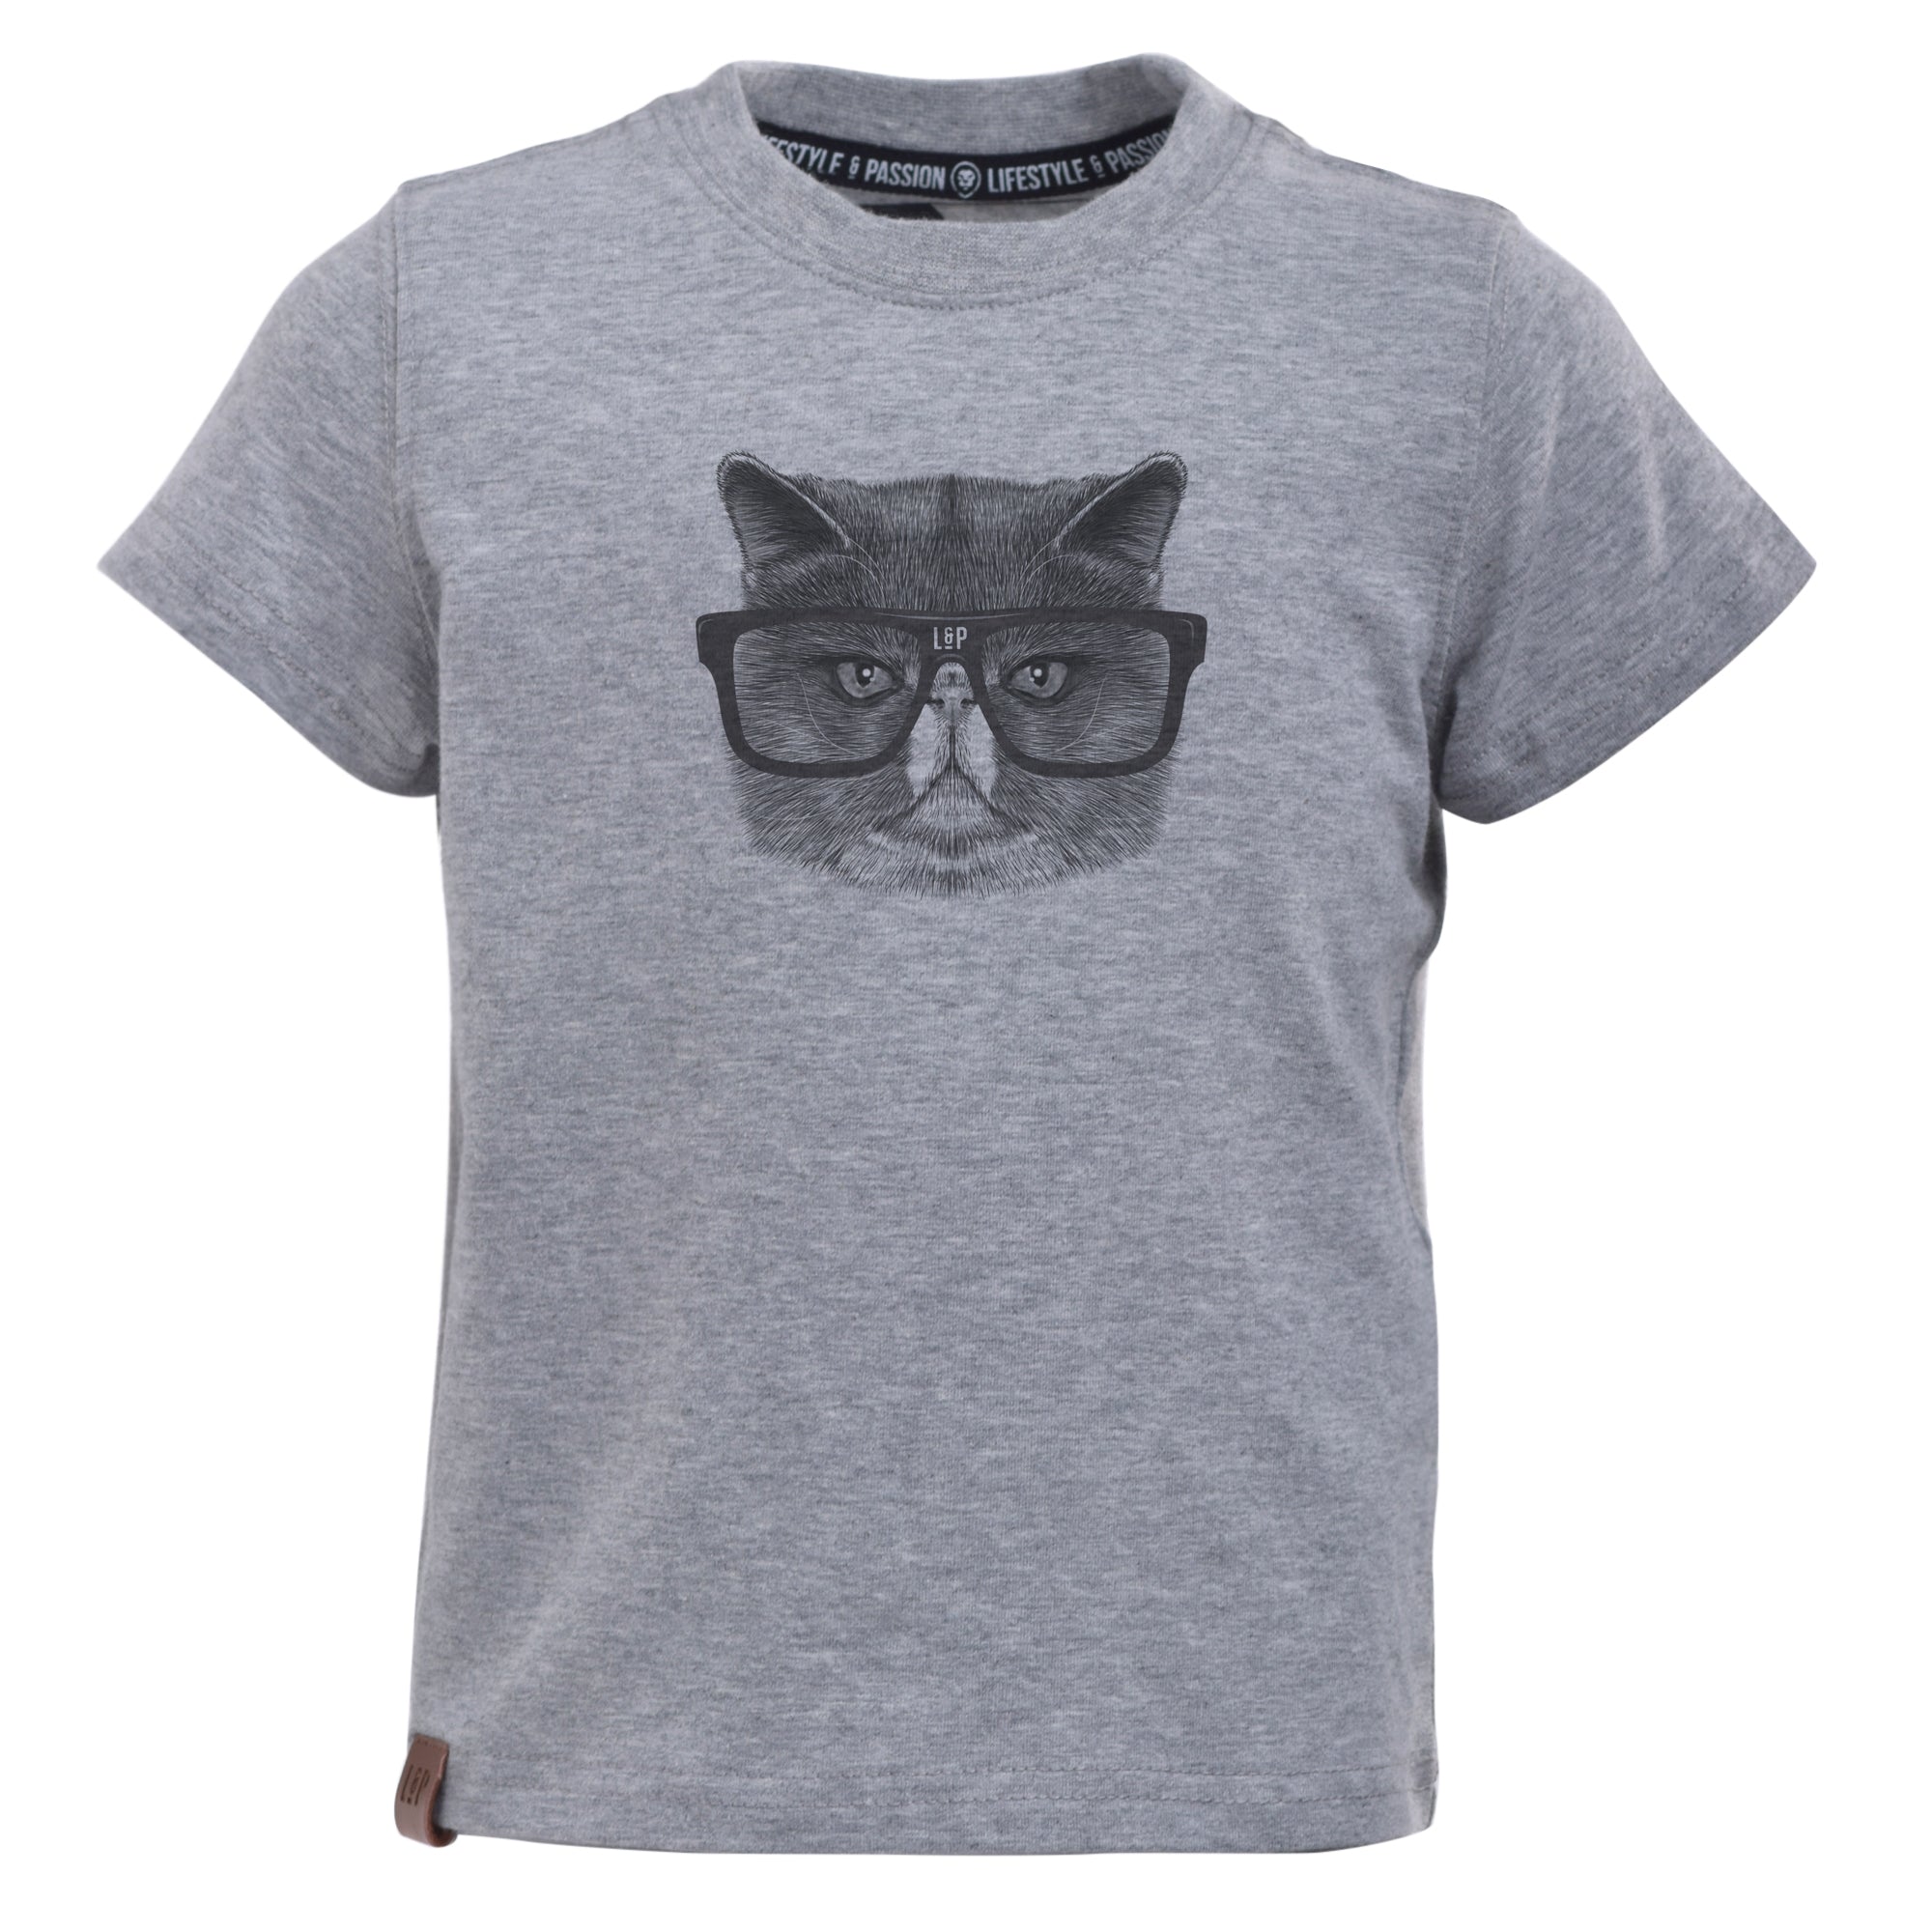 Lp Apparel - Chandail manches courtes, gris chat Angry